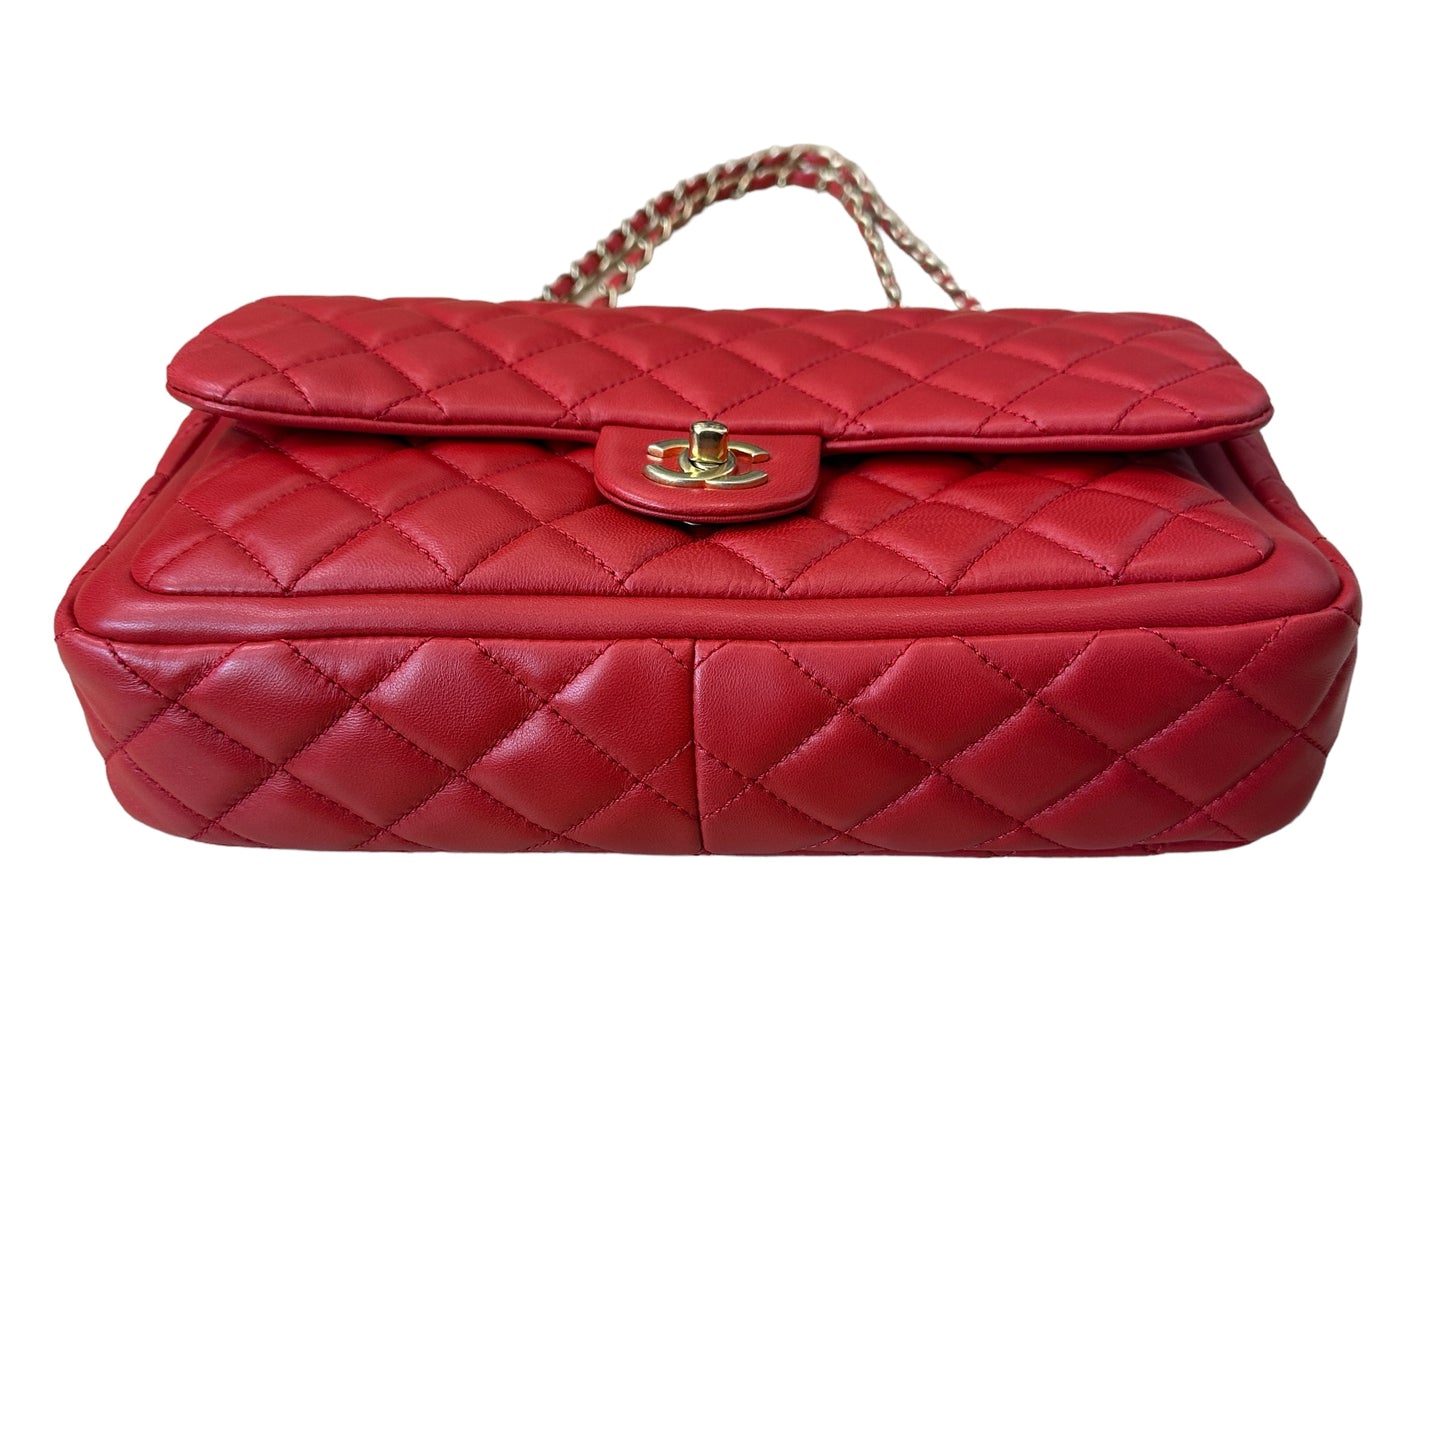 Red & Gold Flap Bag